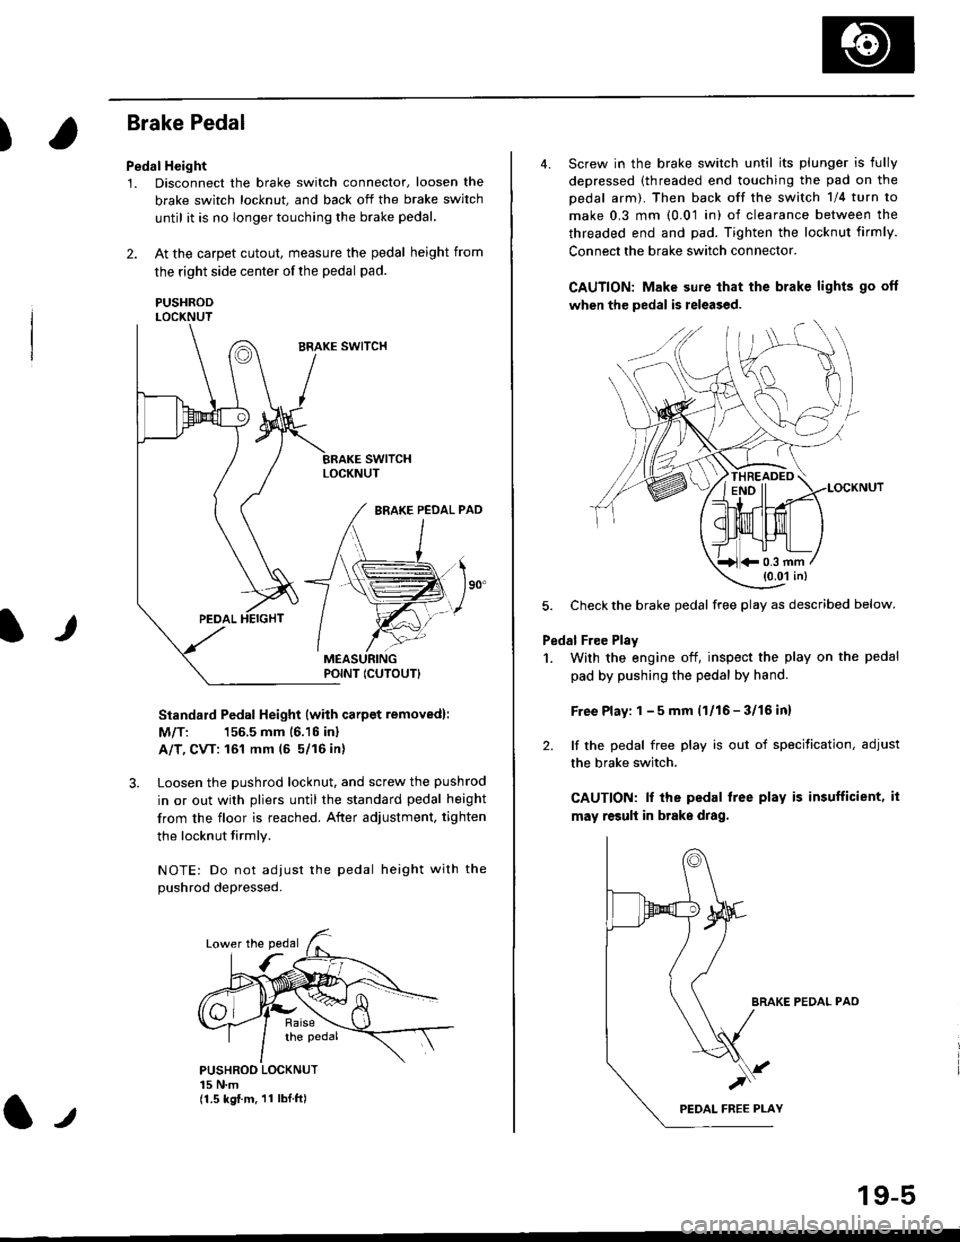 HONDA CIVIC 1997 6.G Workshop Manual )
Brake Pedal
Pedal Height
1. Disconnect the brake switch connector, loosen the
brake switch locknut, and back off the brake switch
until it is no longer touching the brake pedal,
2. At the carpet cut